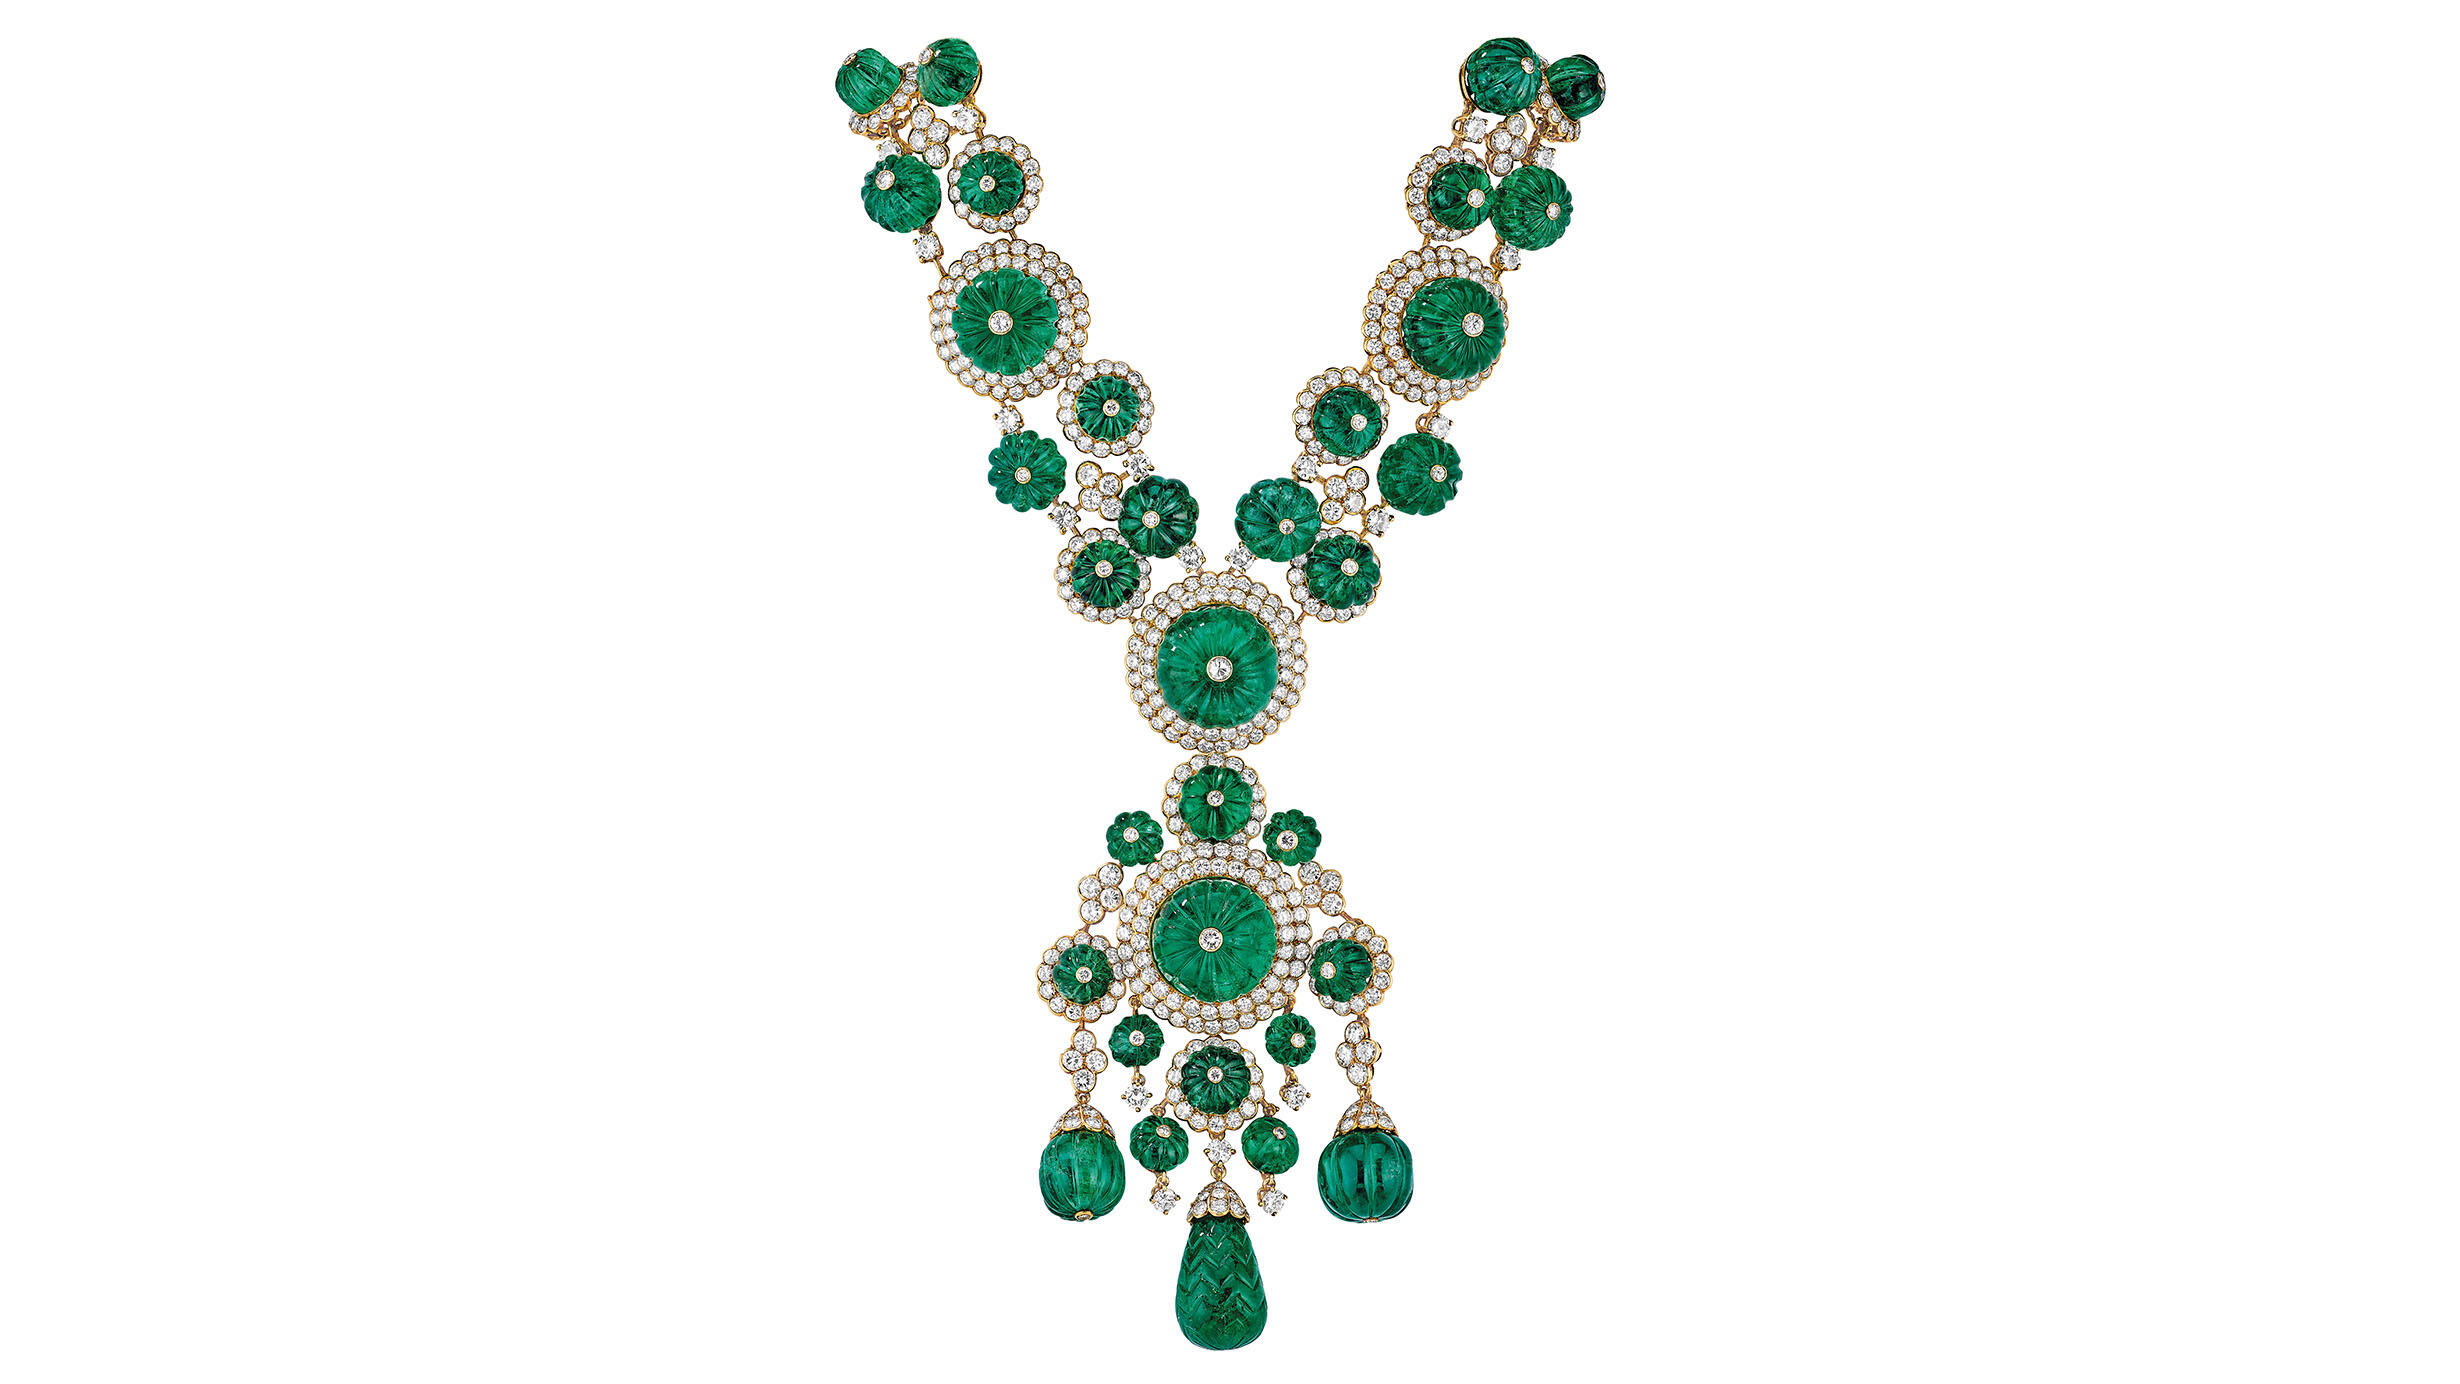 Emerald and diamond necklace ending in an elaborate pendant.